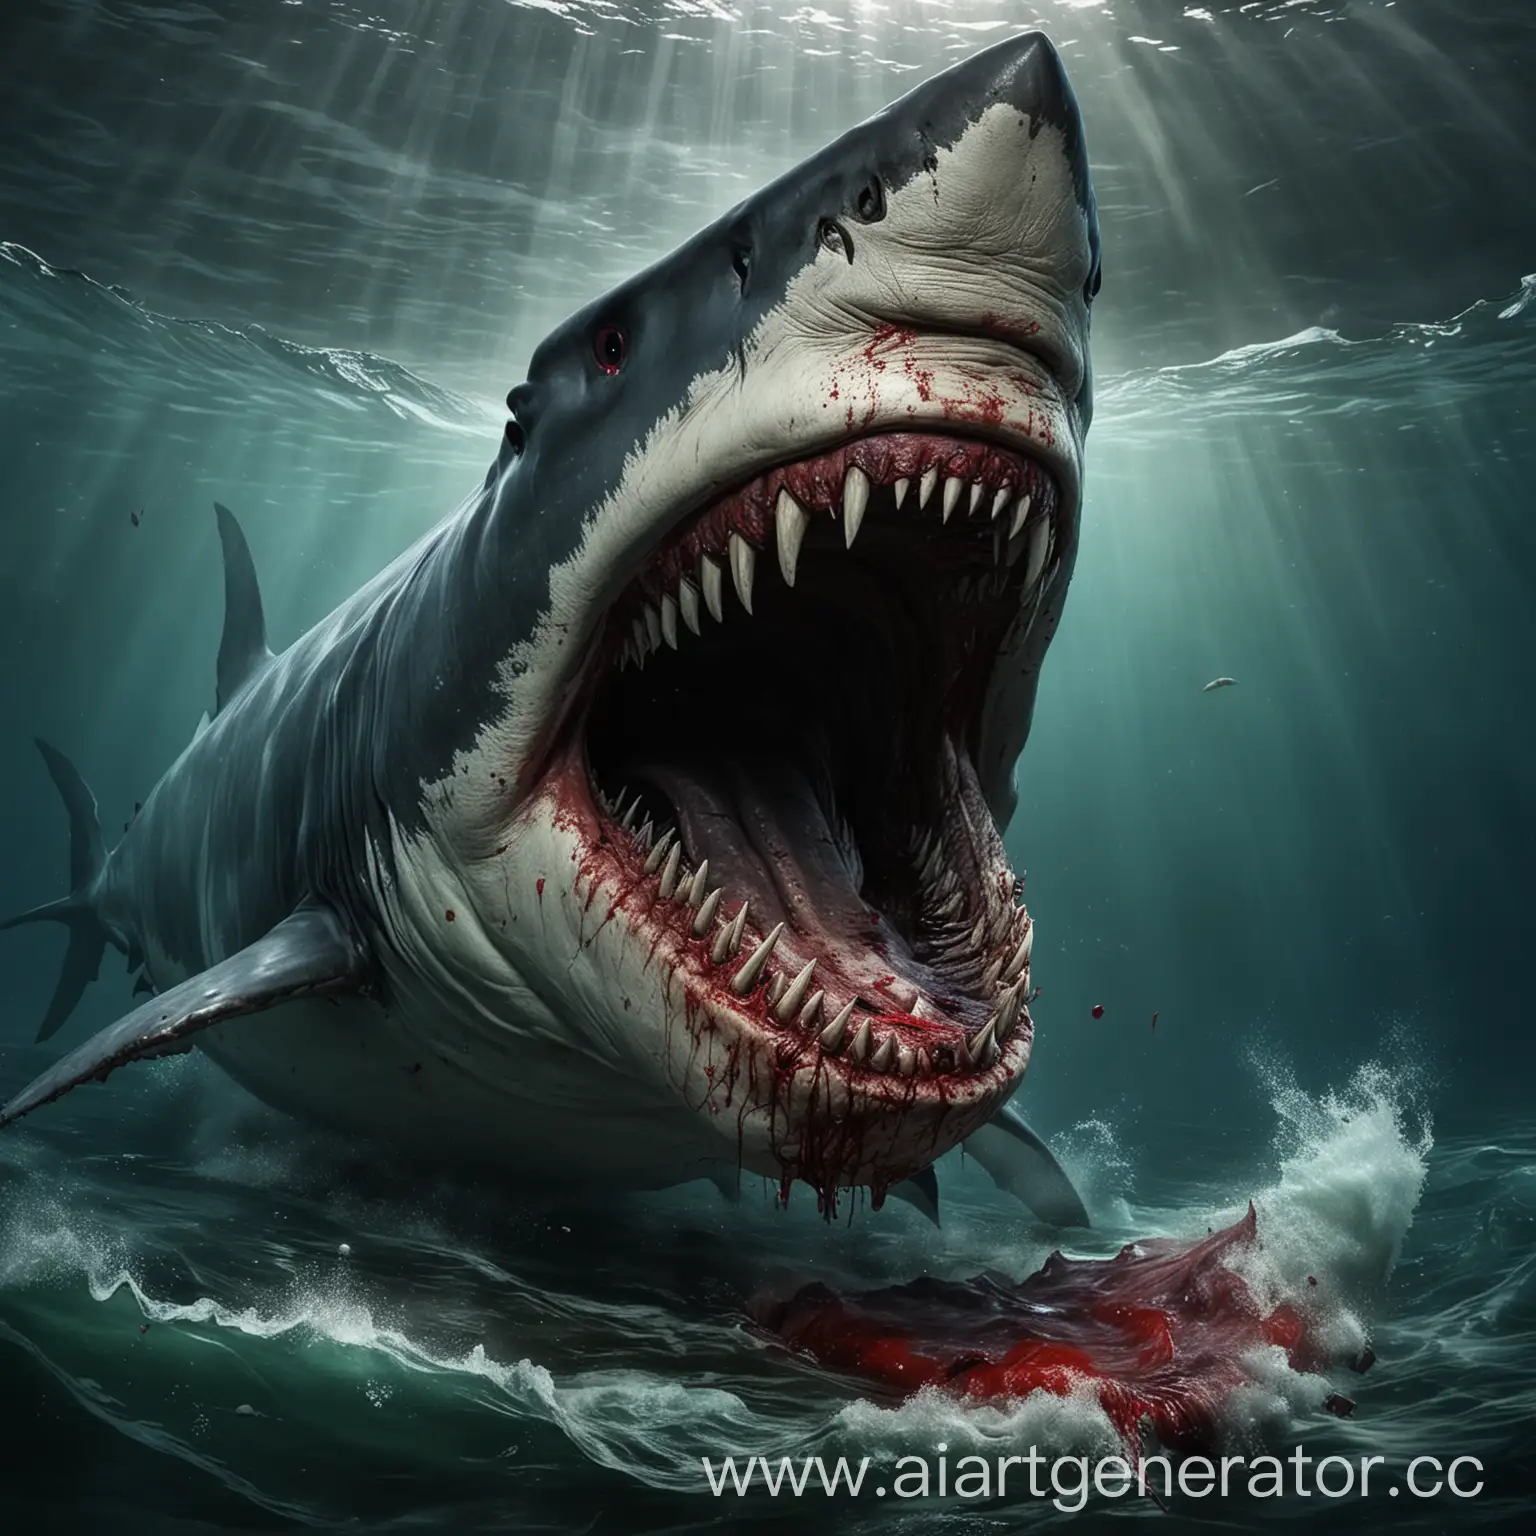 Terrifying-Megalodon-Giant-Shark-with-Bloodied-Teeth-Strikes-Fear